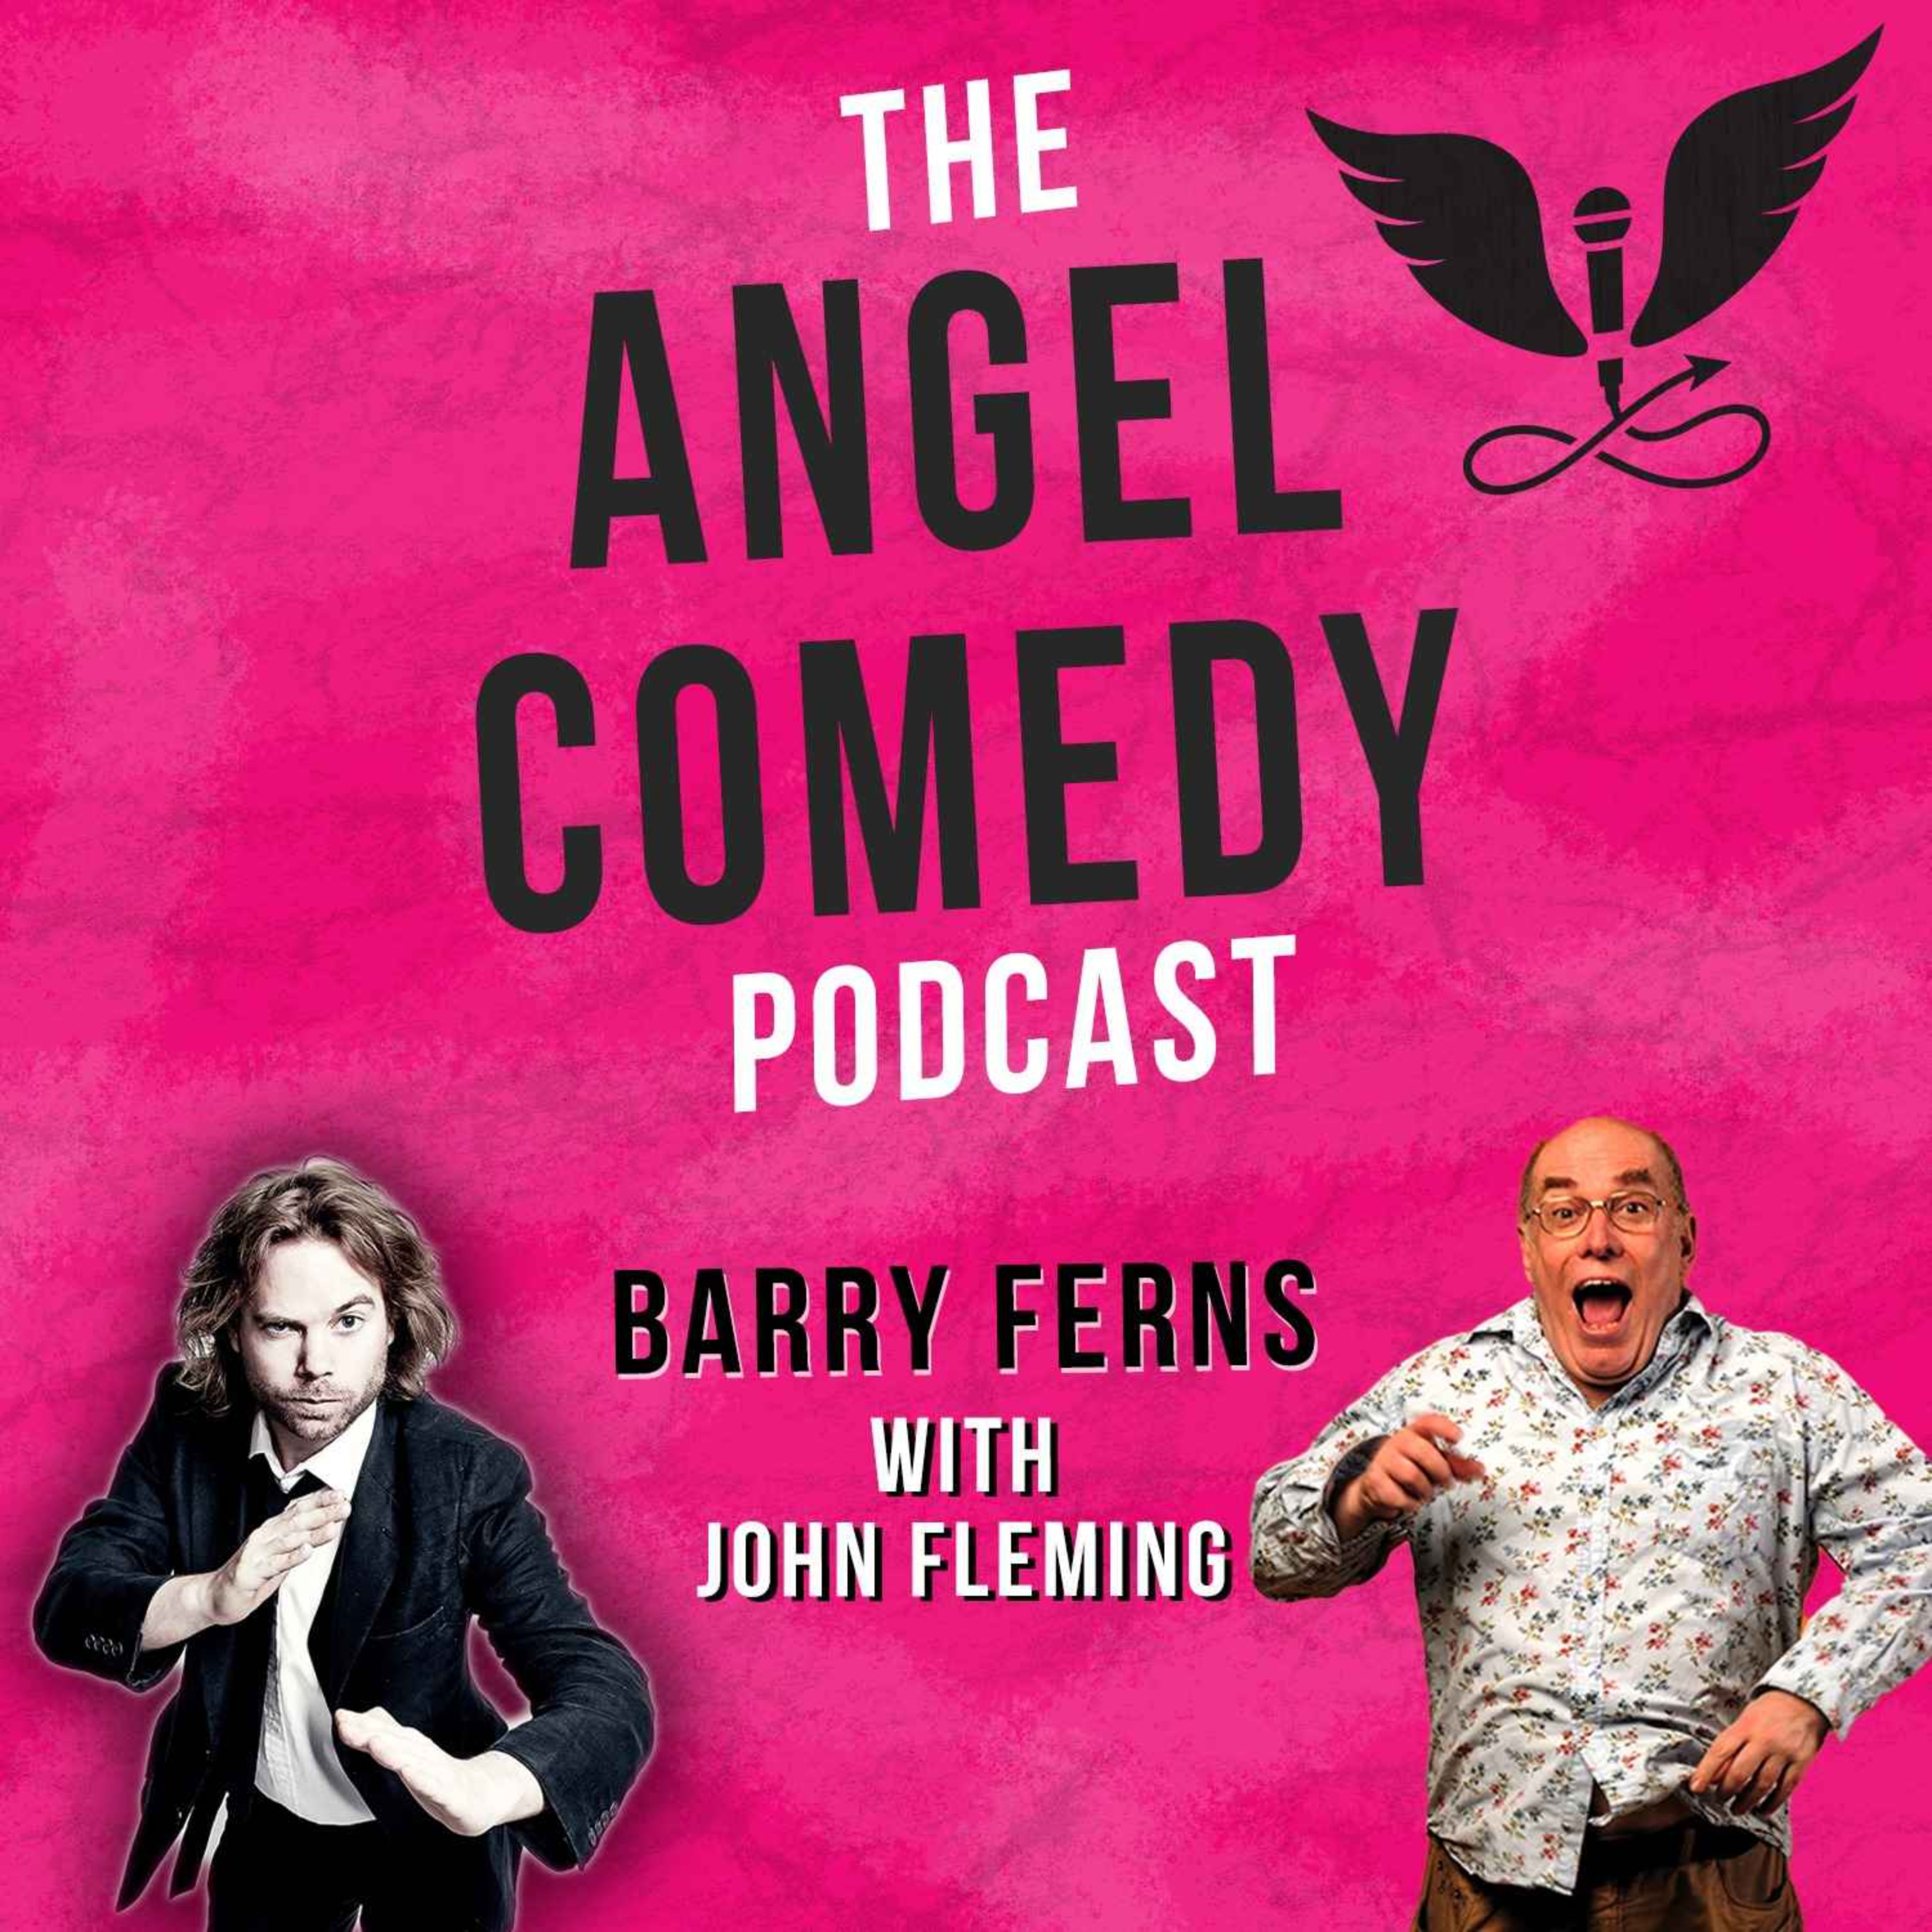 The Angel Comedy Podcast with John Fleming